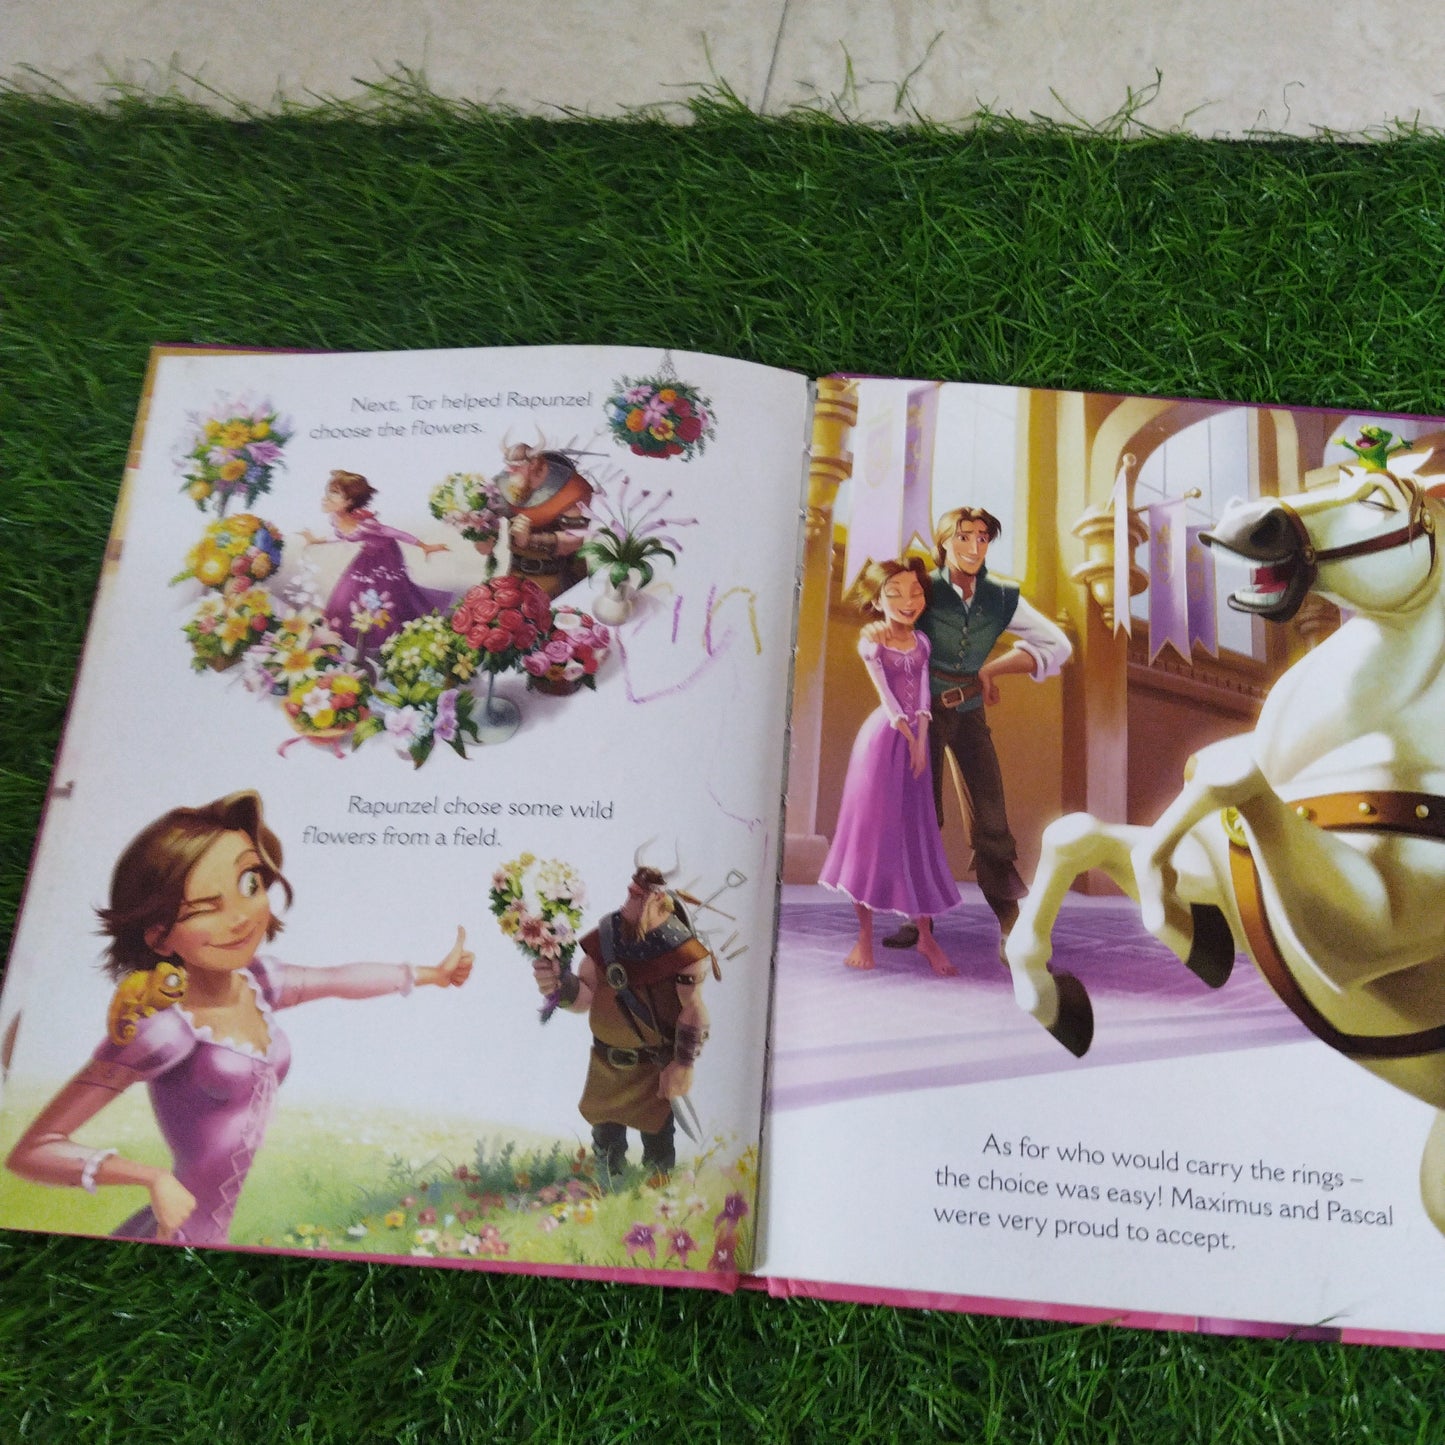 Disney Princess Tangled Ever After The Magical Story